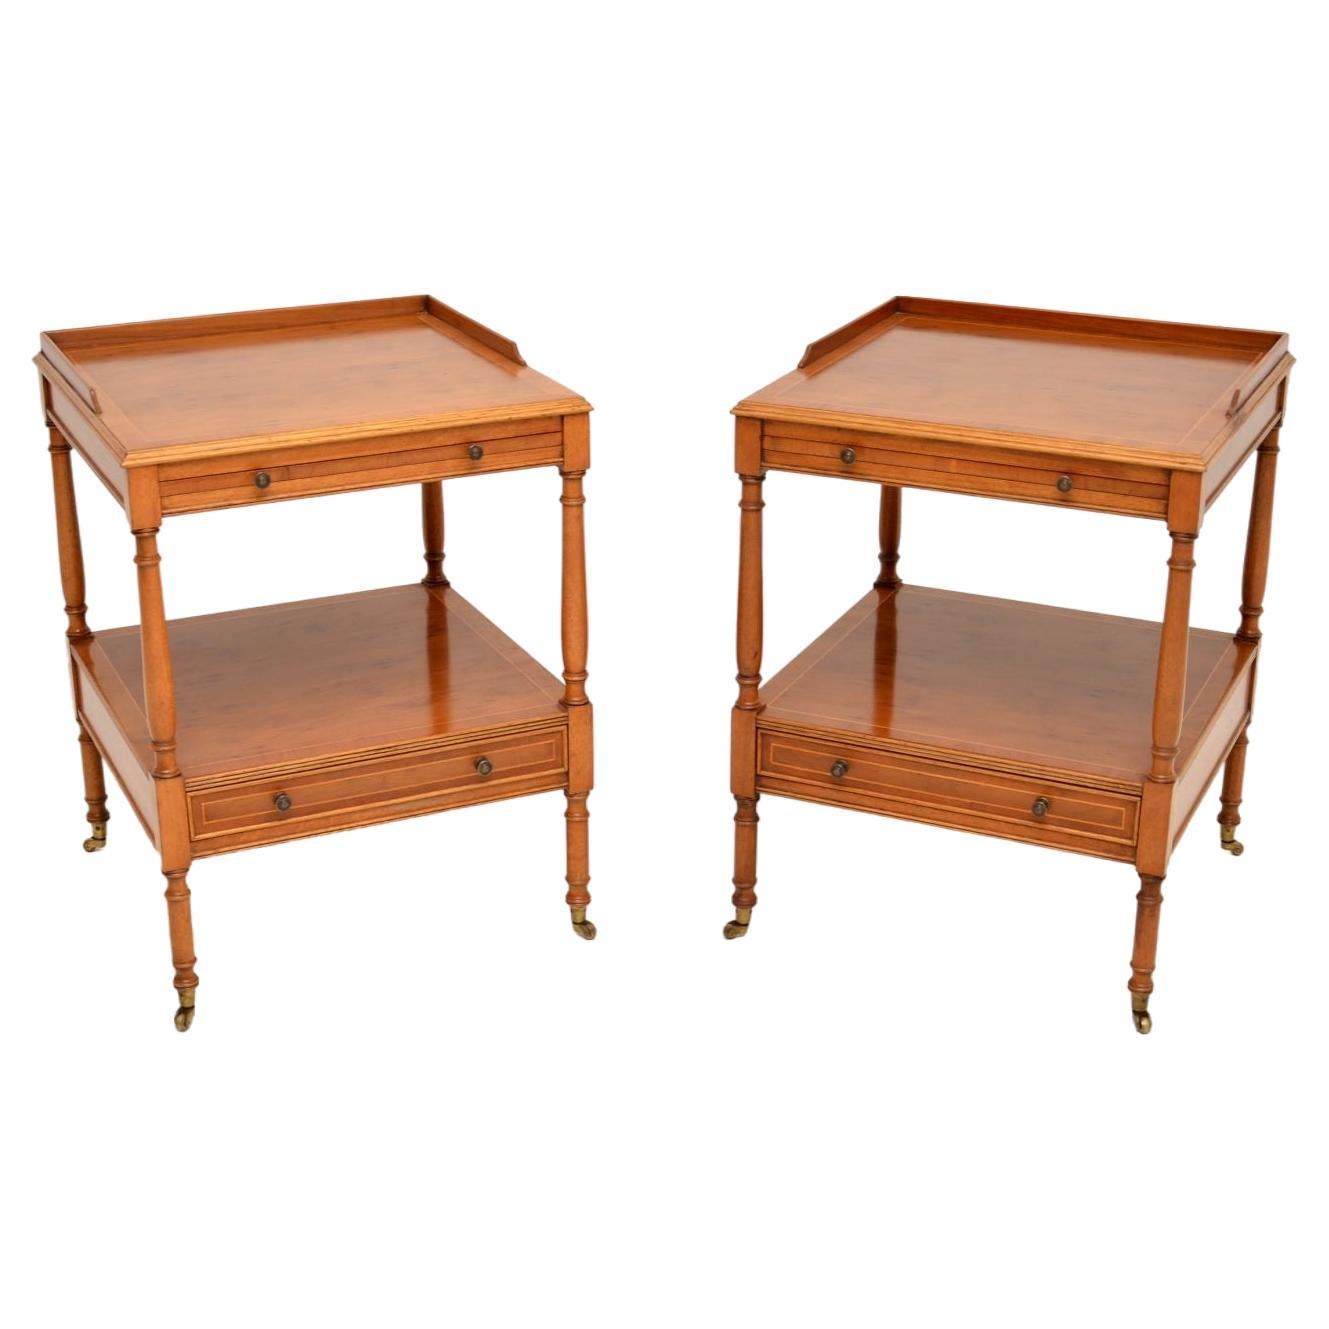 Pair of Antique Georgian Style Side Tables in Yew Wood